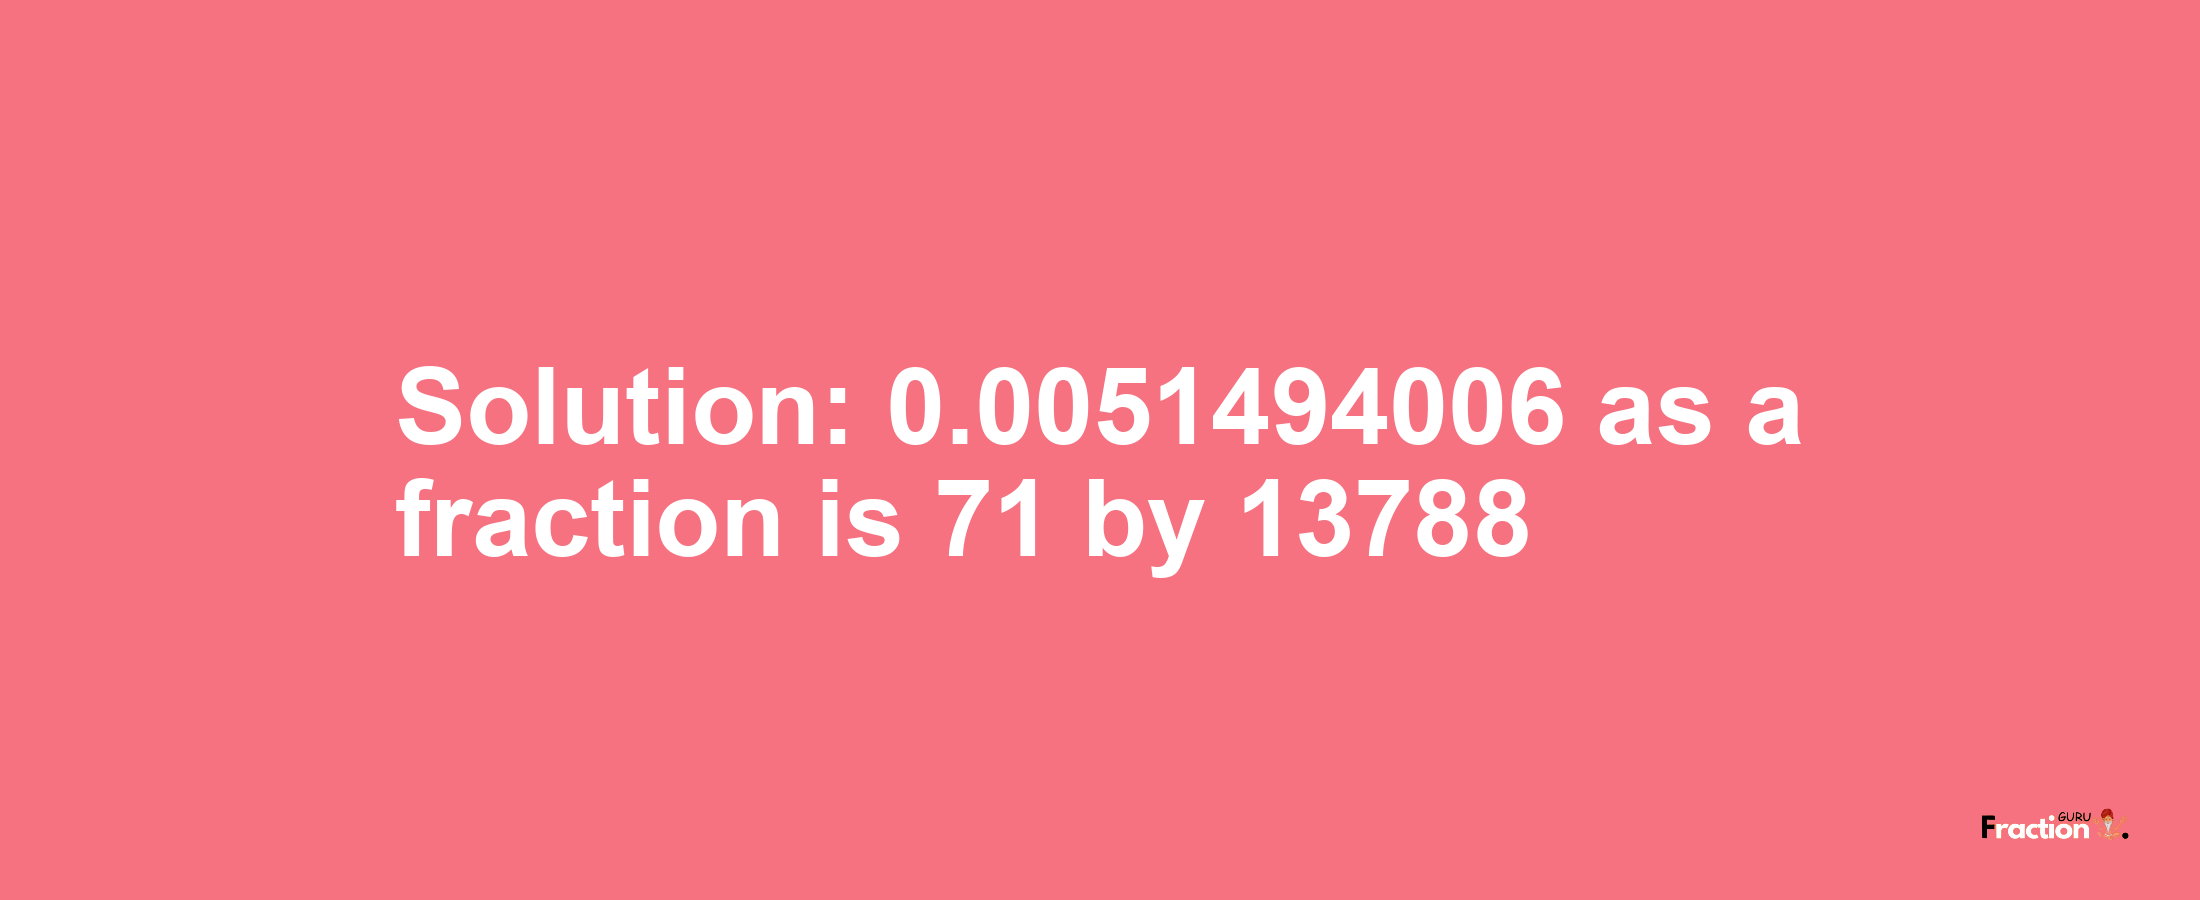 Solution:0.0051494006 as a fraction is 71/13788